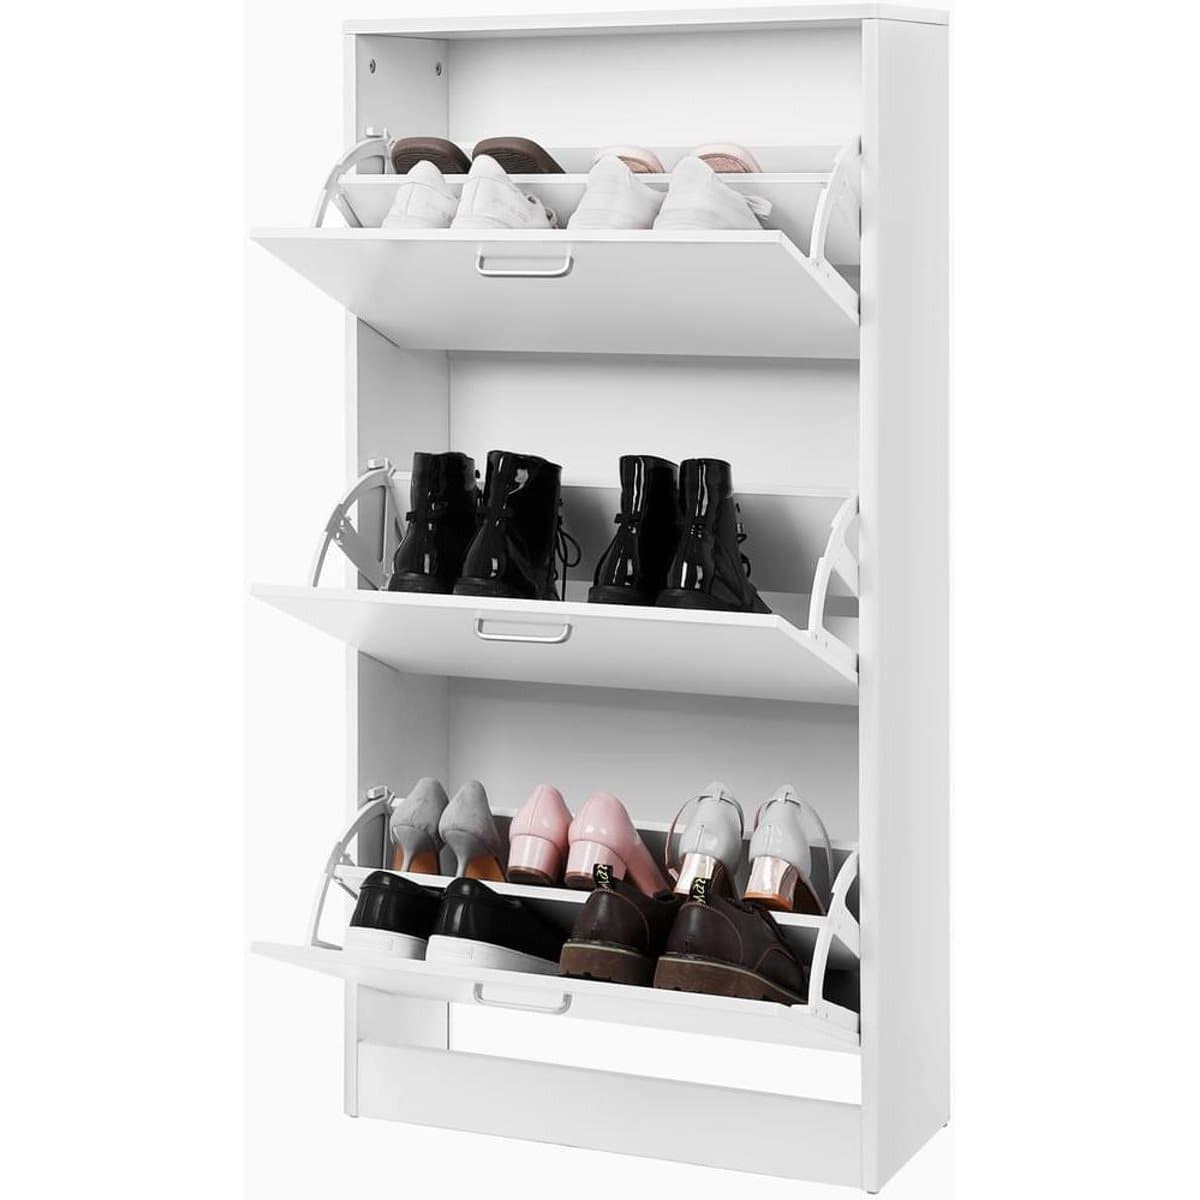 Nancy's Shoe Cabinet - With 3 Flaps - For 12-18 Pairs of Shoes - Shoe Storage